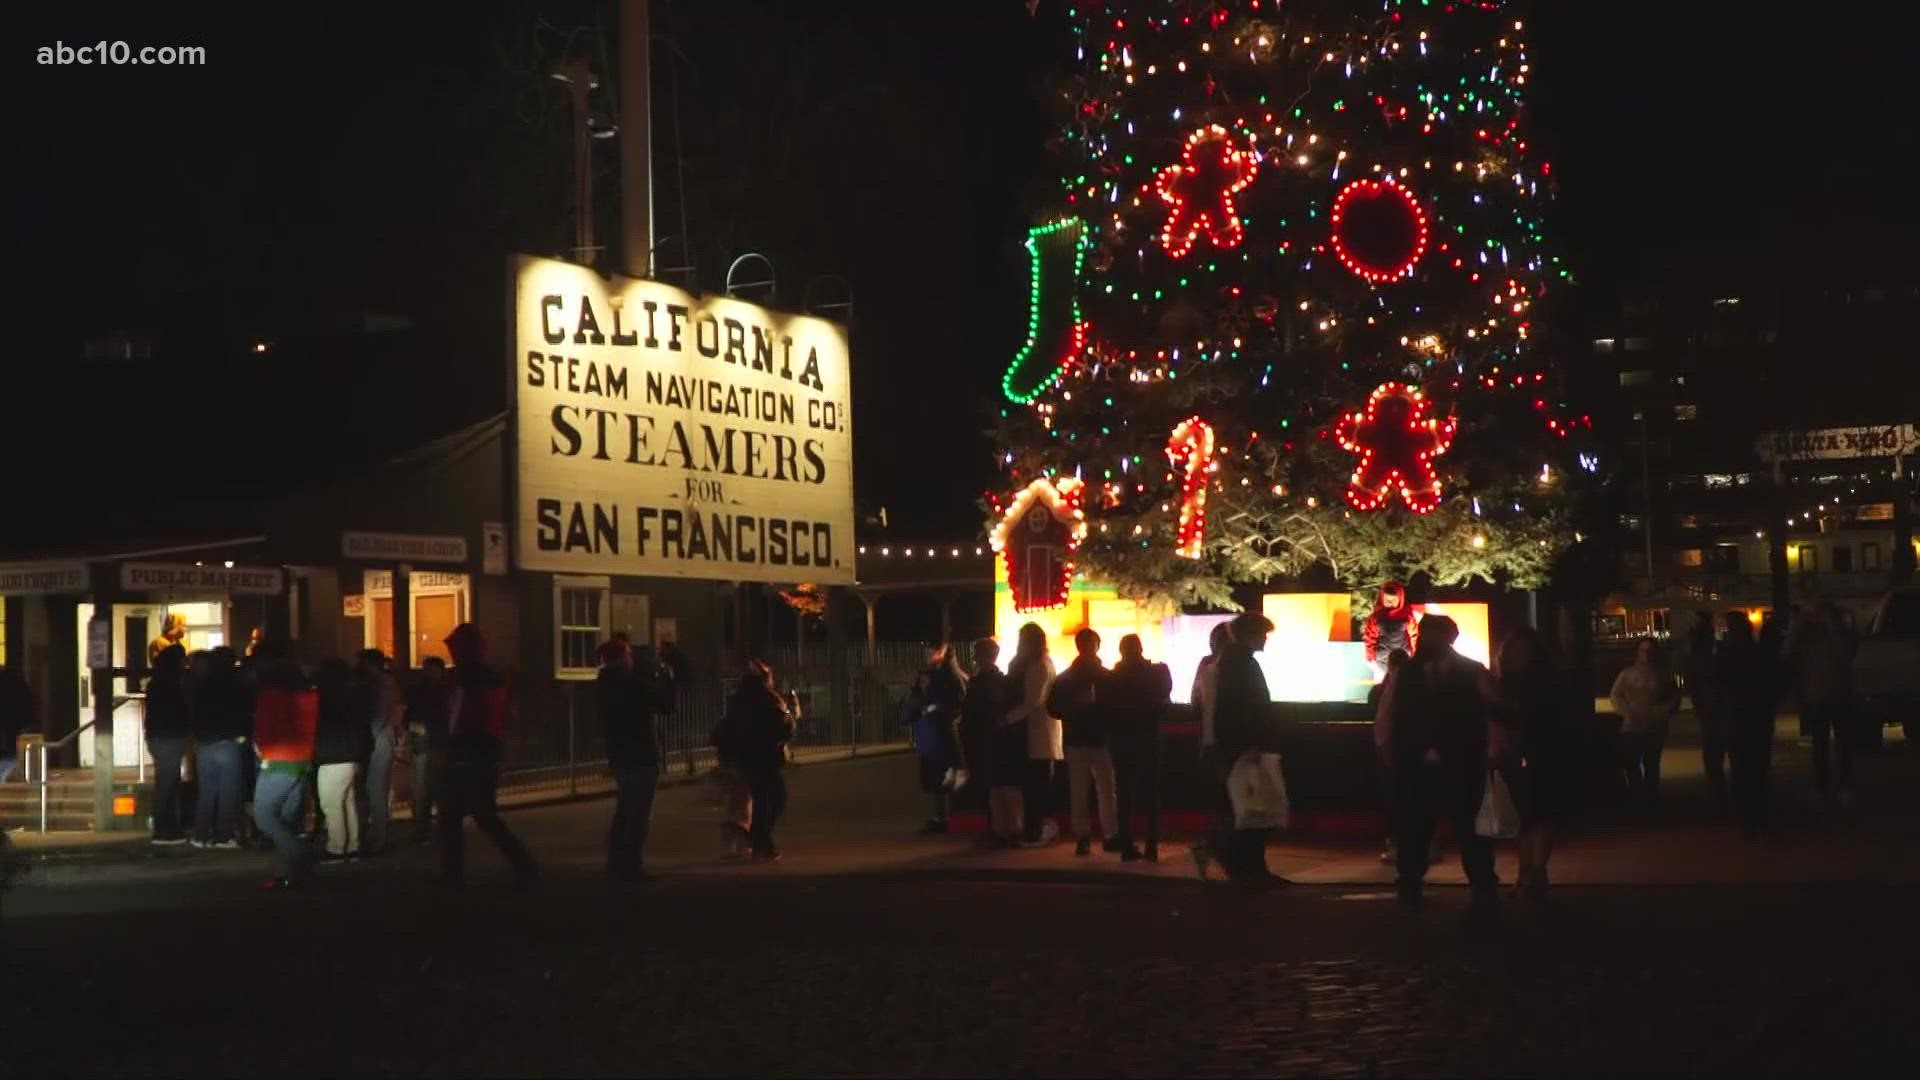 ABC10 asked how people are reflecting on the past year as they enjoyed the lights of Old Sacramento.